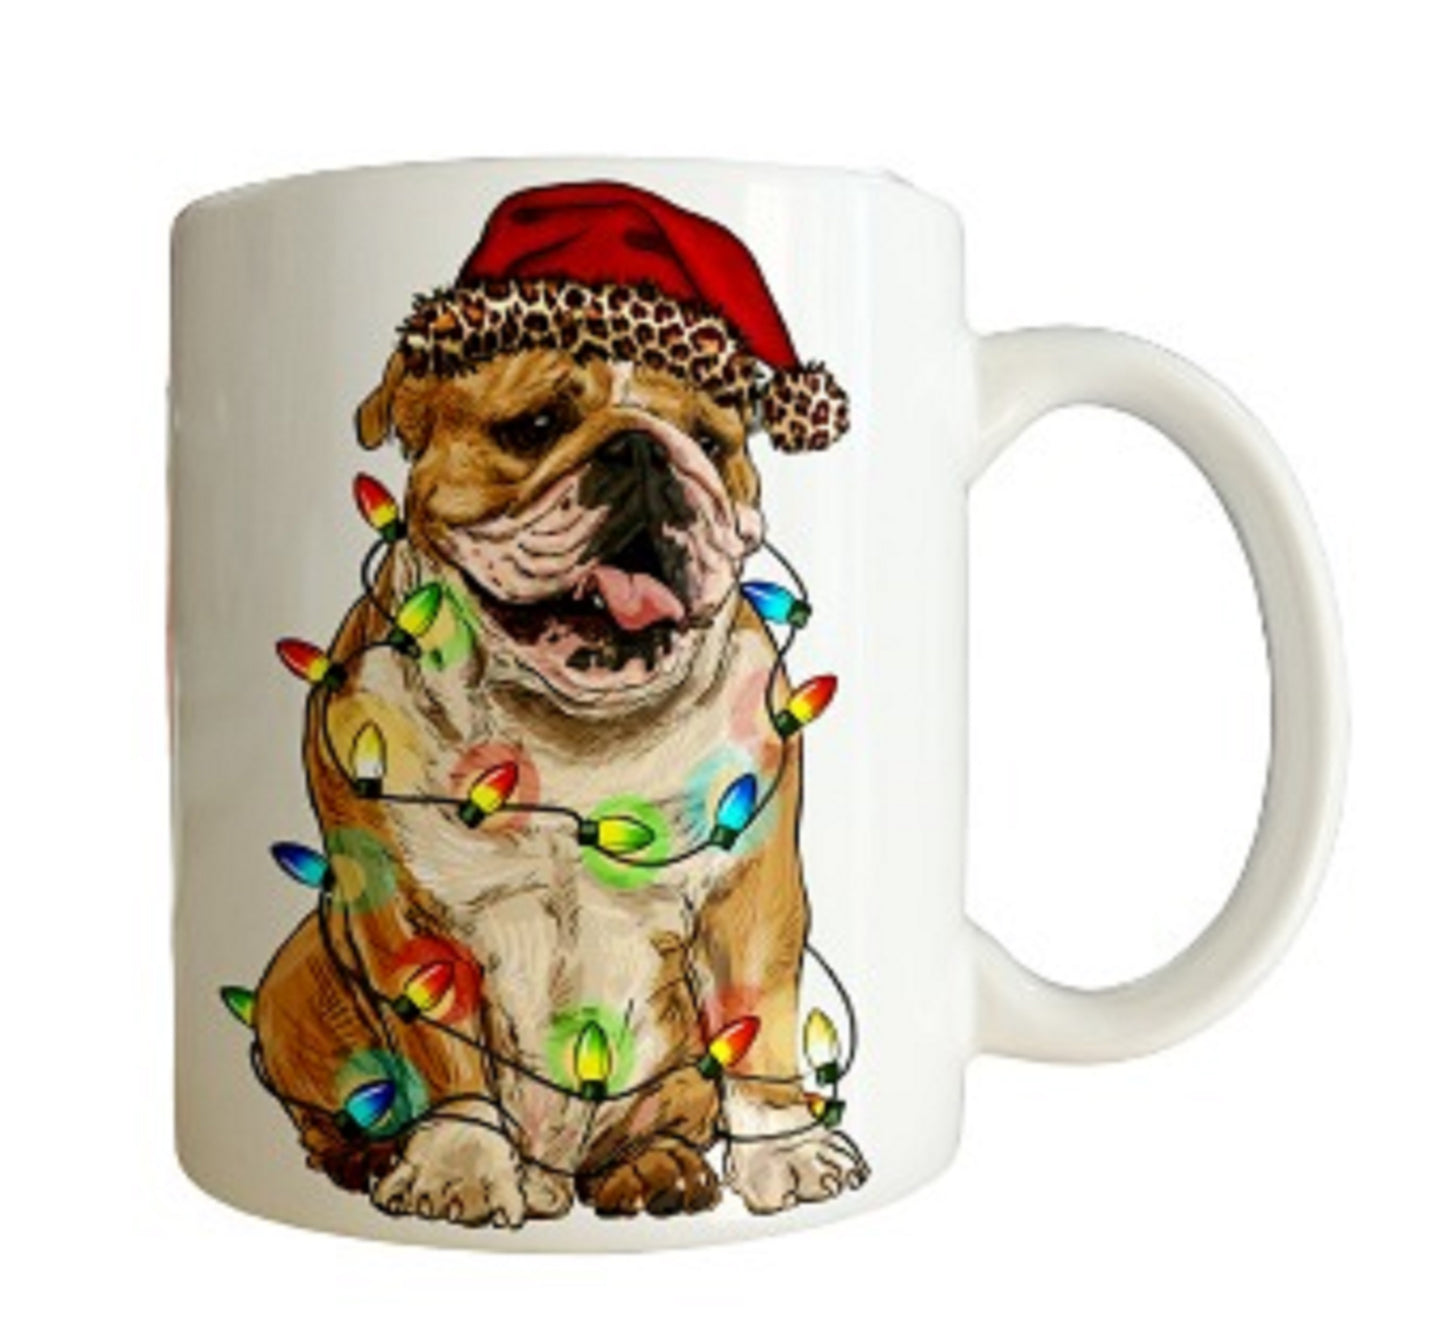  English Bulldog Wrapped in Christmas Lights Mug by Free Spirit Accessories sold by Free Spirit Accessories